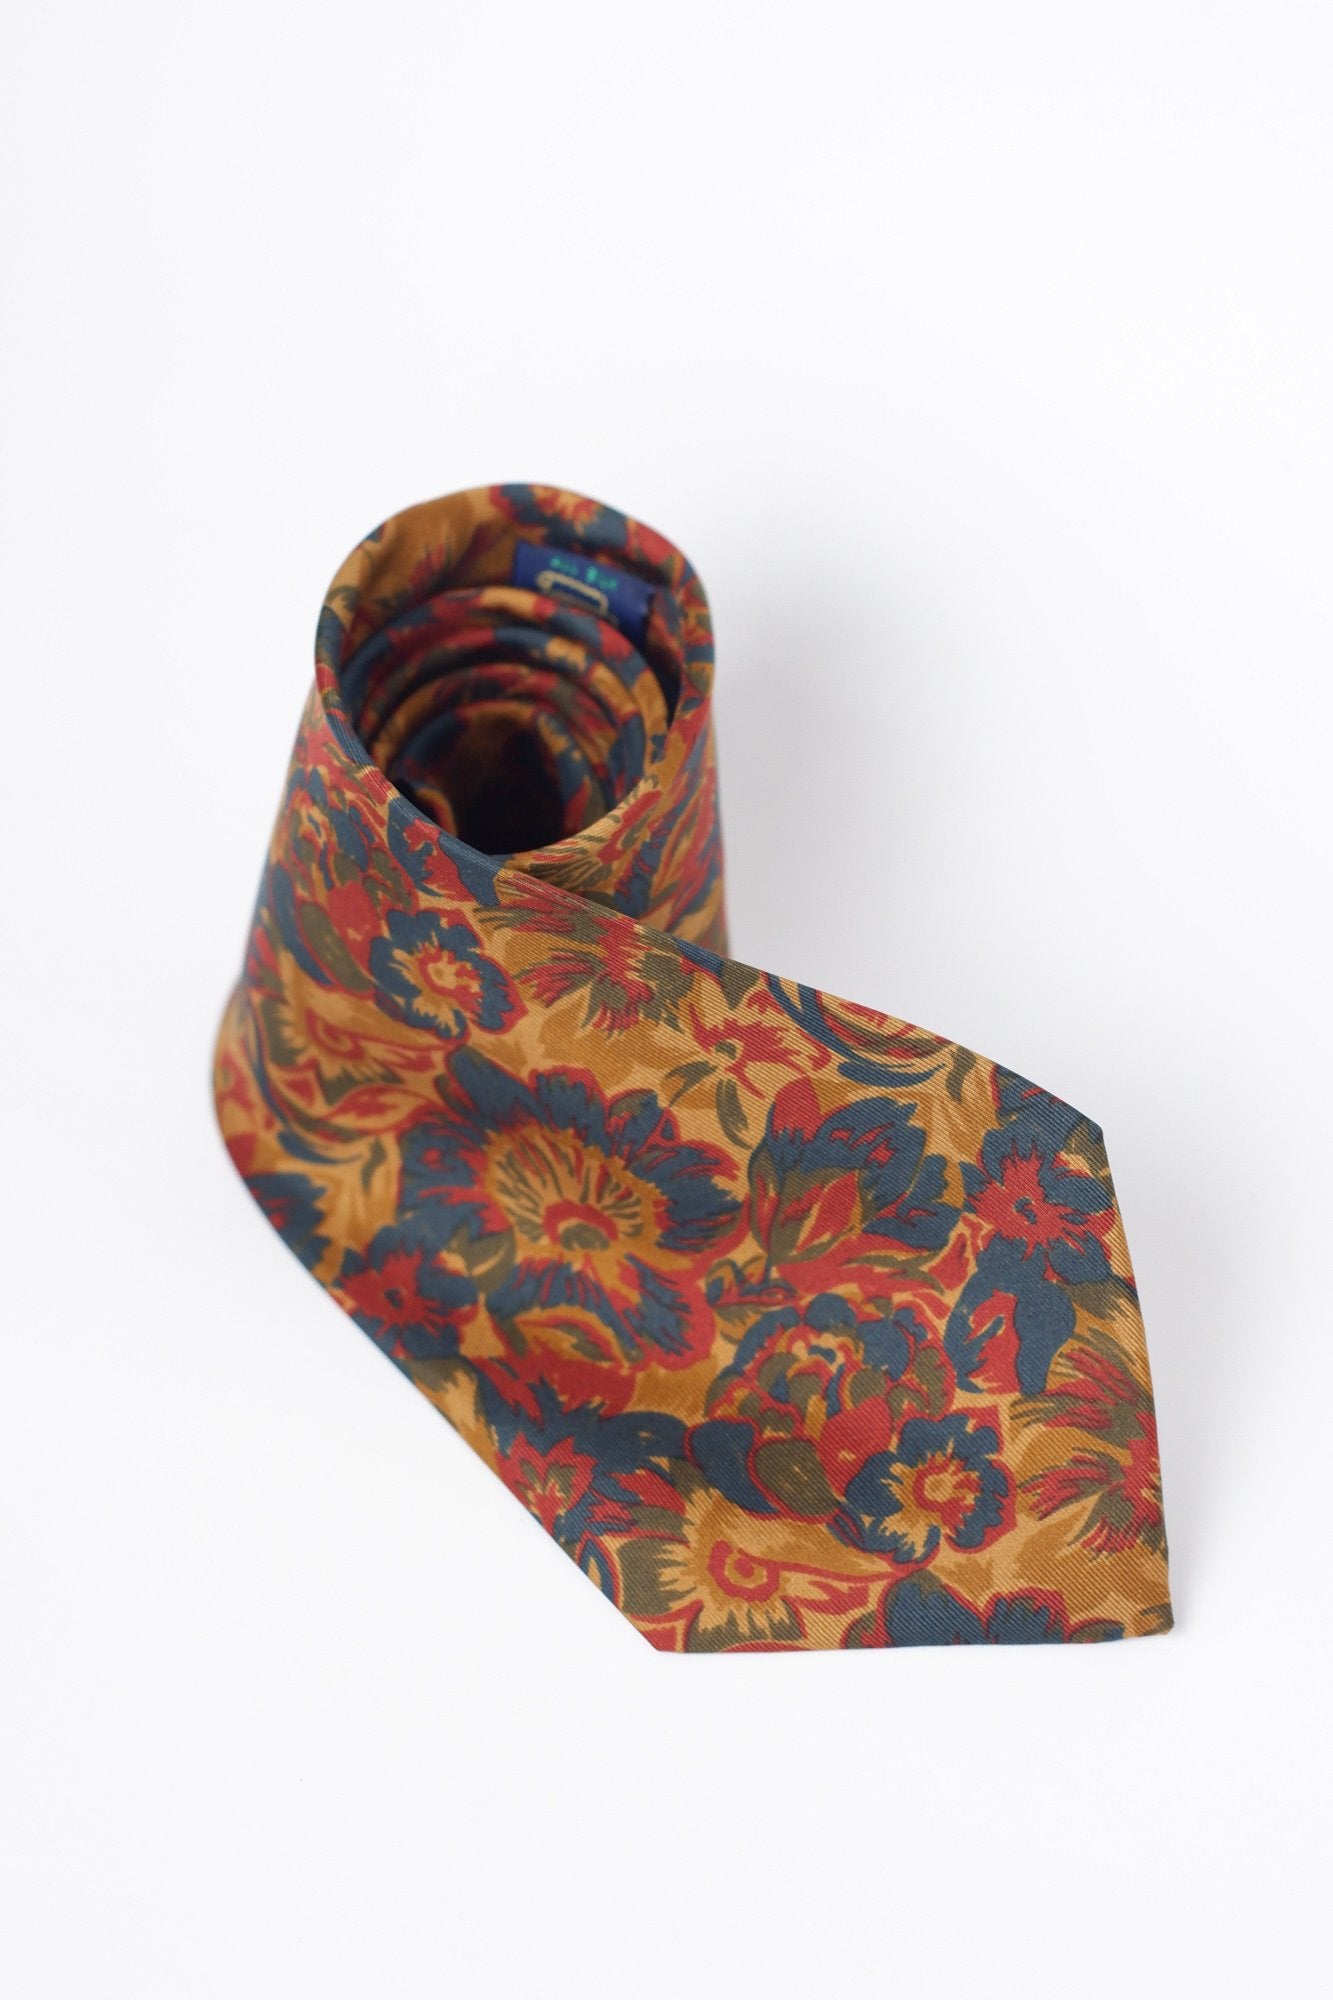 P. Fumagalli Yellow and Navy Floral Necktie